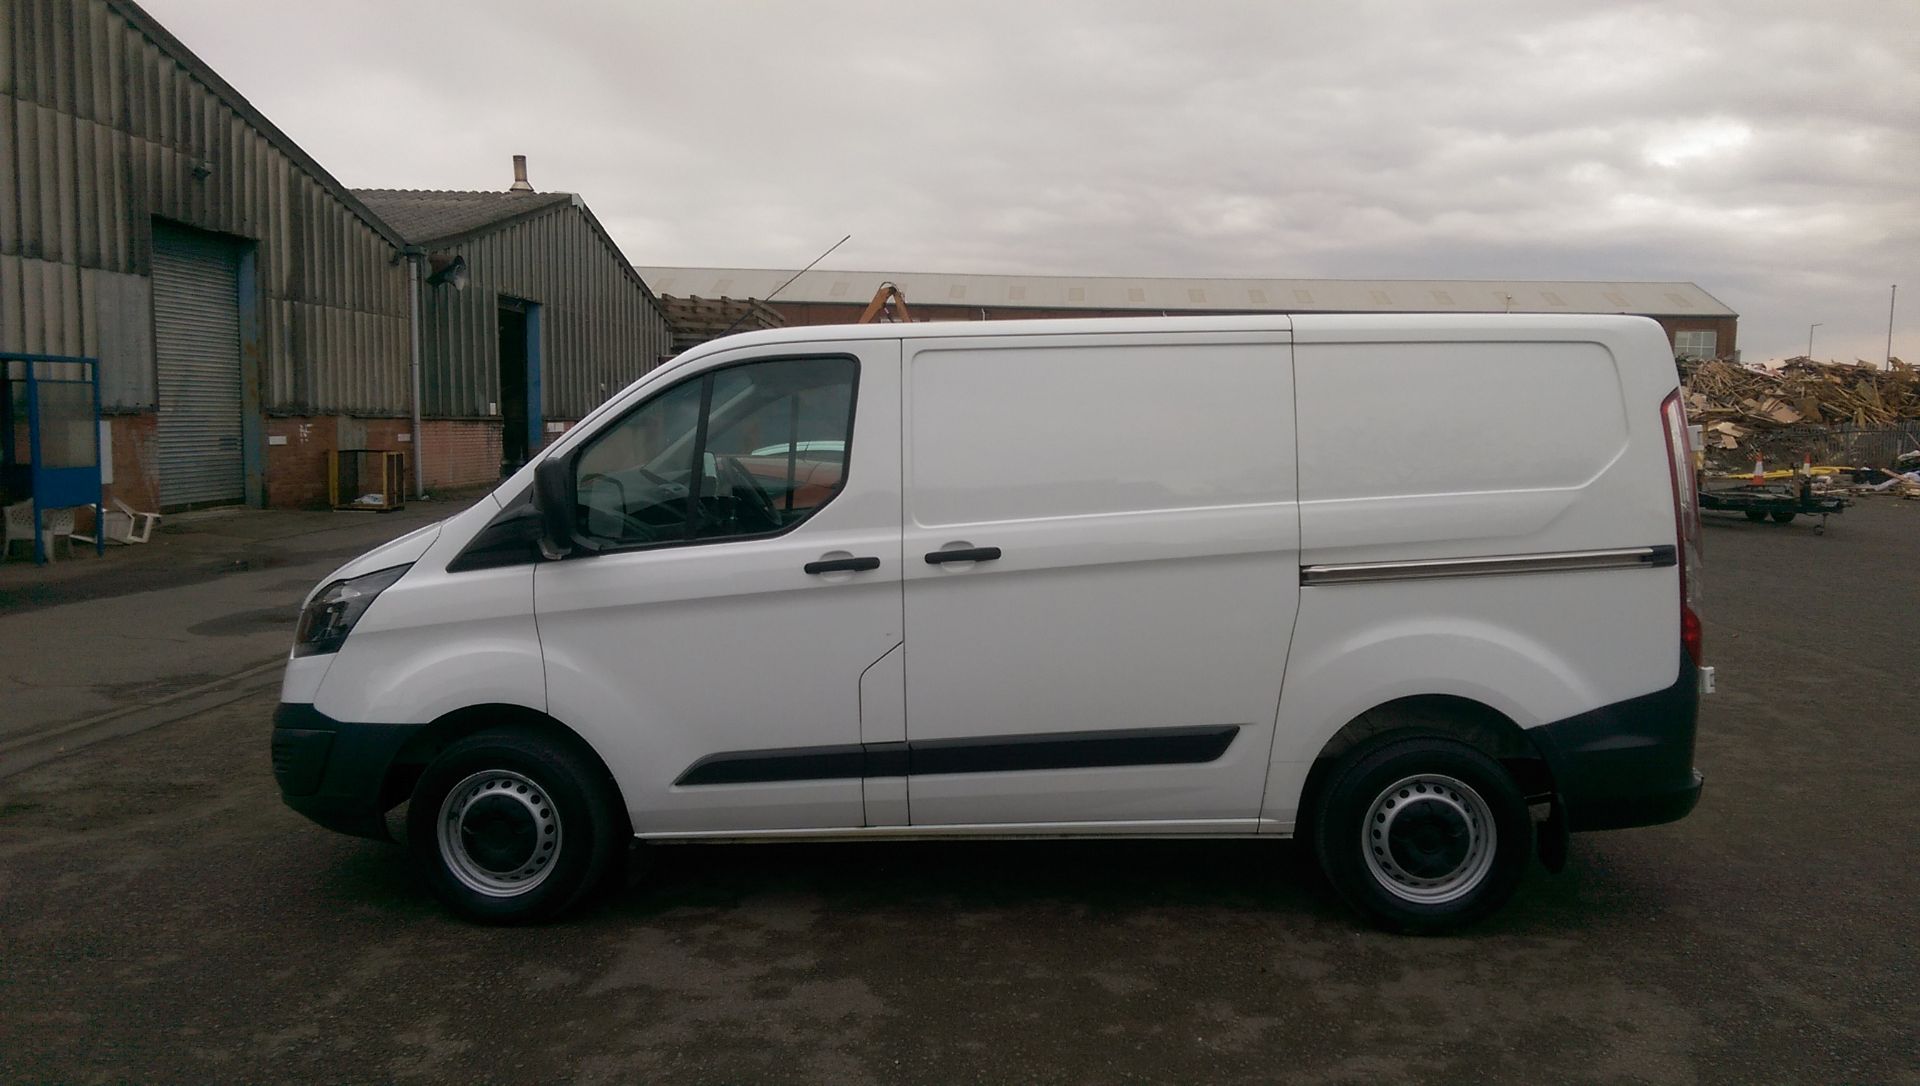 Ford Transit 100PS T270 FDW SL13 HFS 52k miles - Image 4 of 5